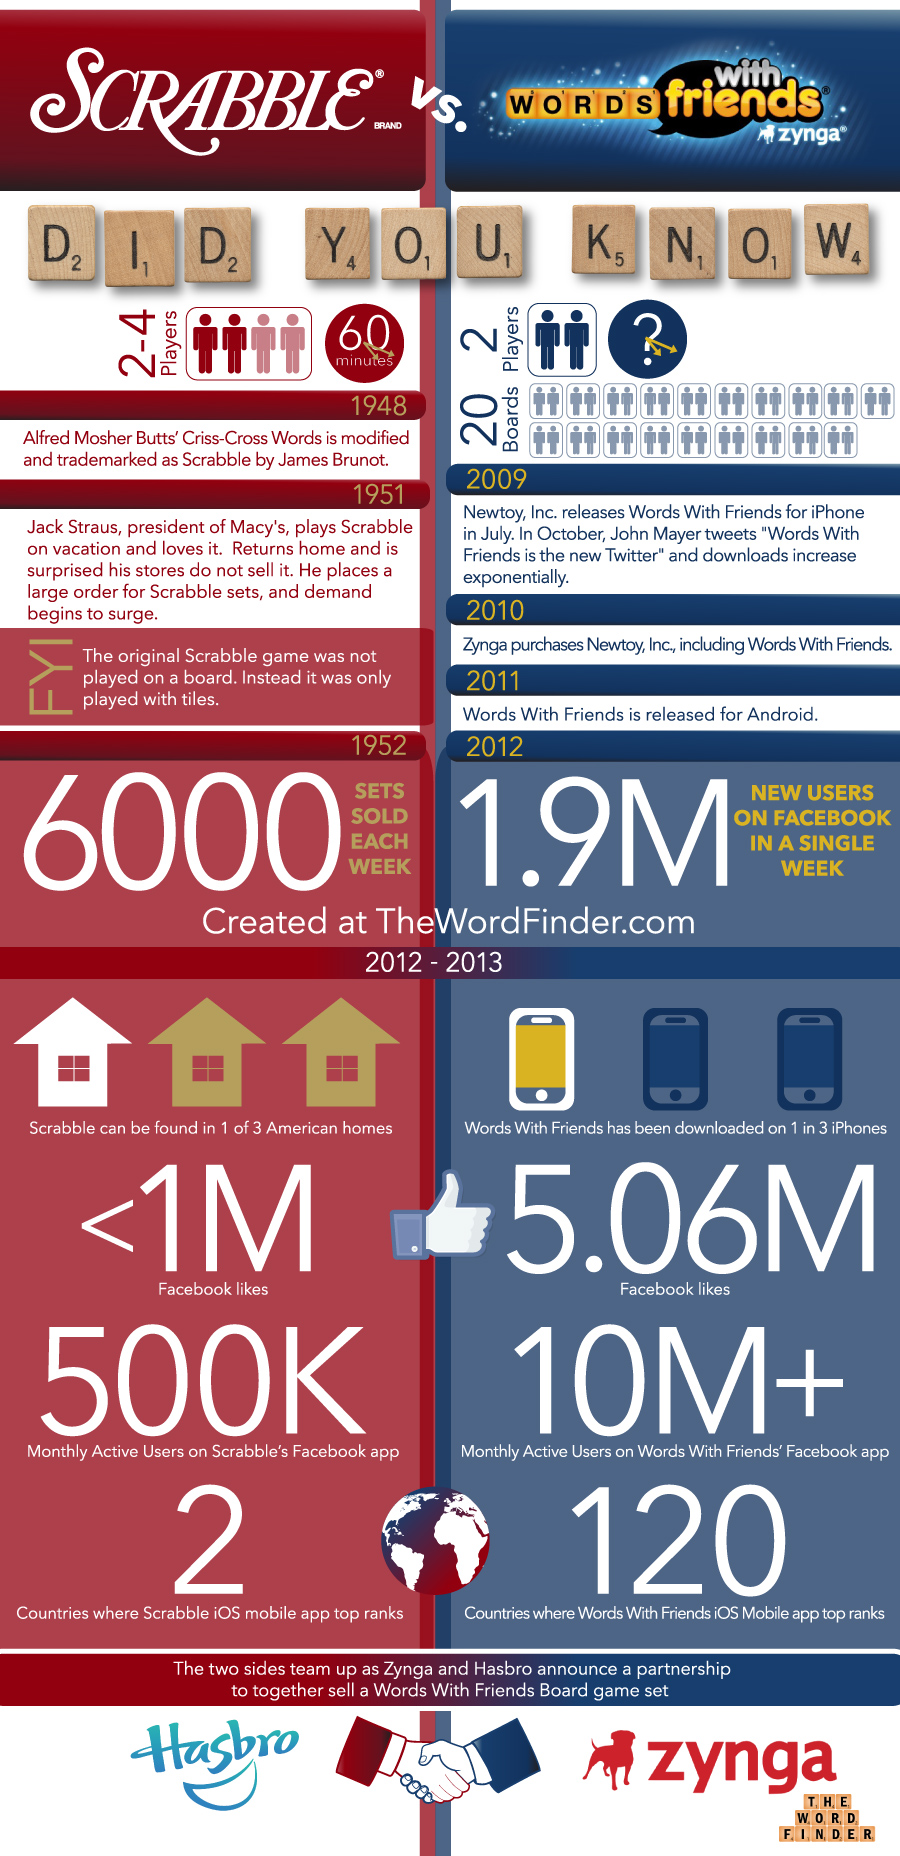 scrabble vs words with friends infographic